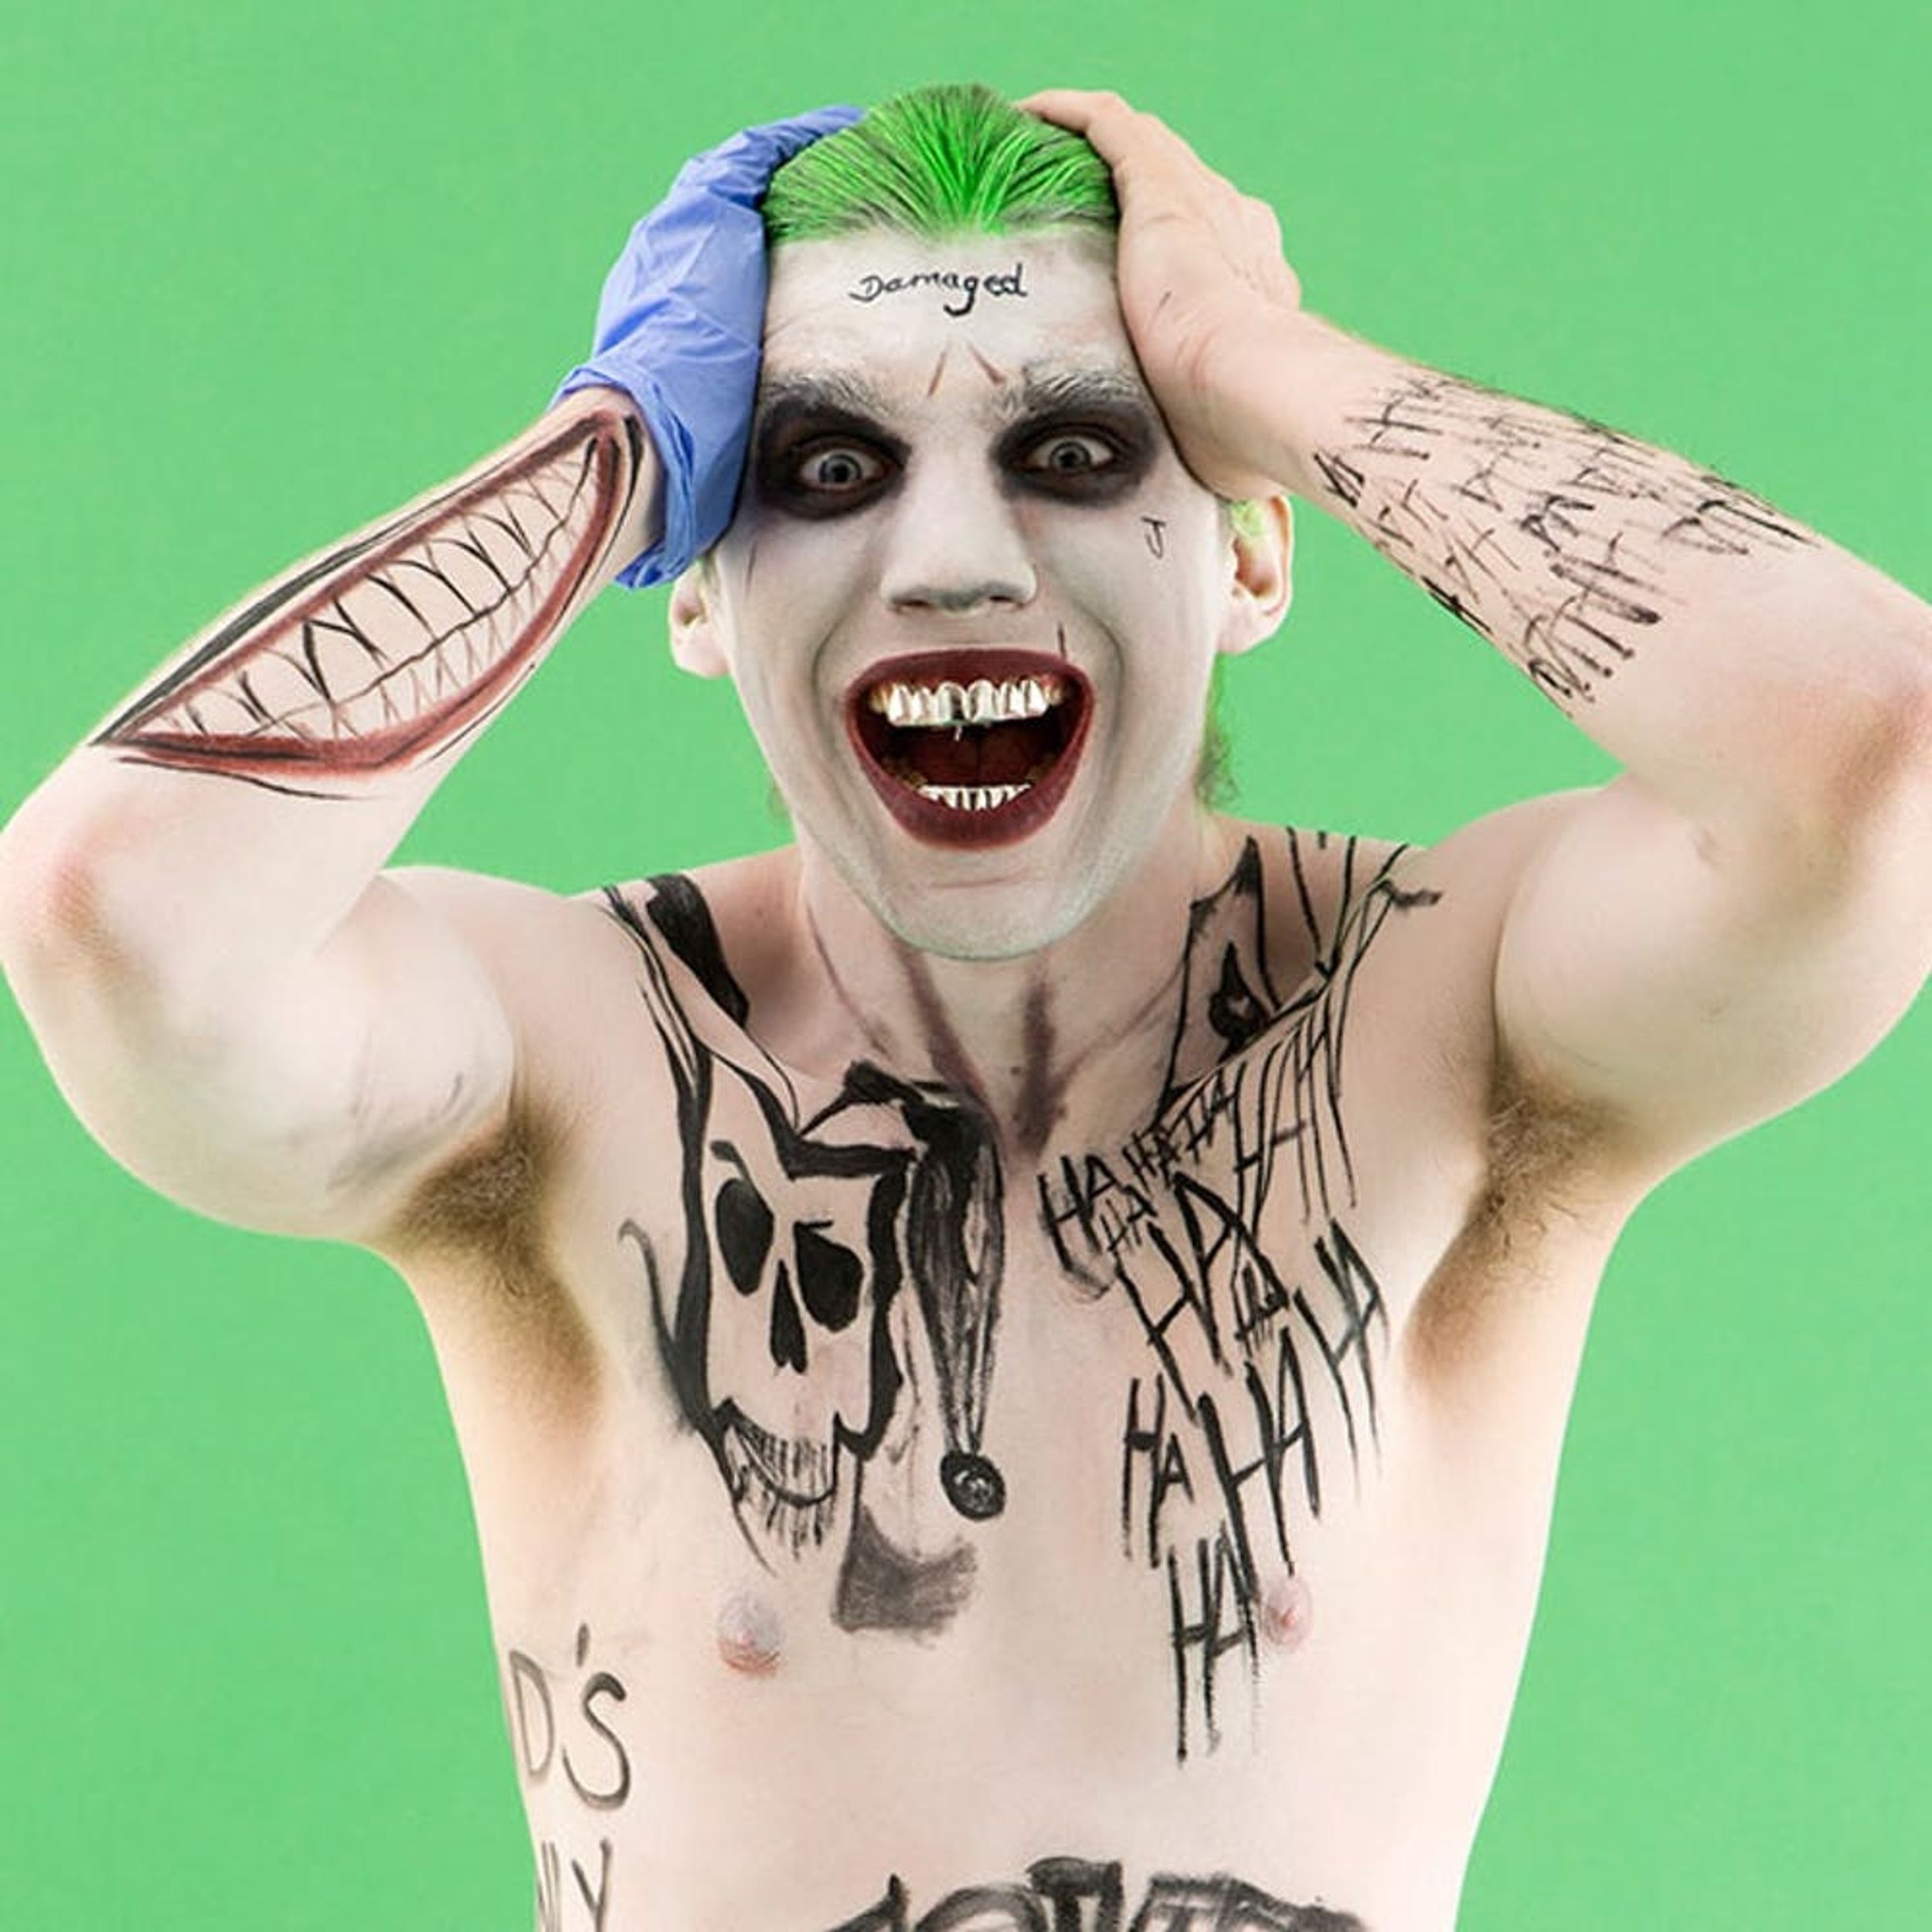 How to Make Suicide Squad’s The Joker Costume for Halloween